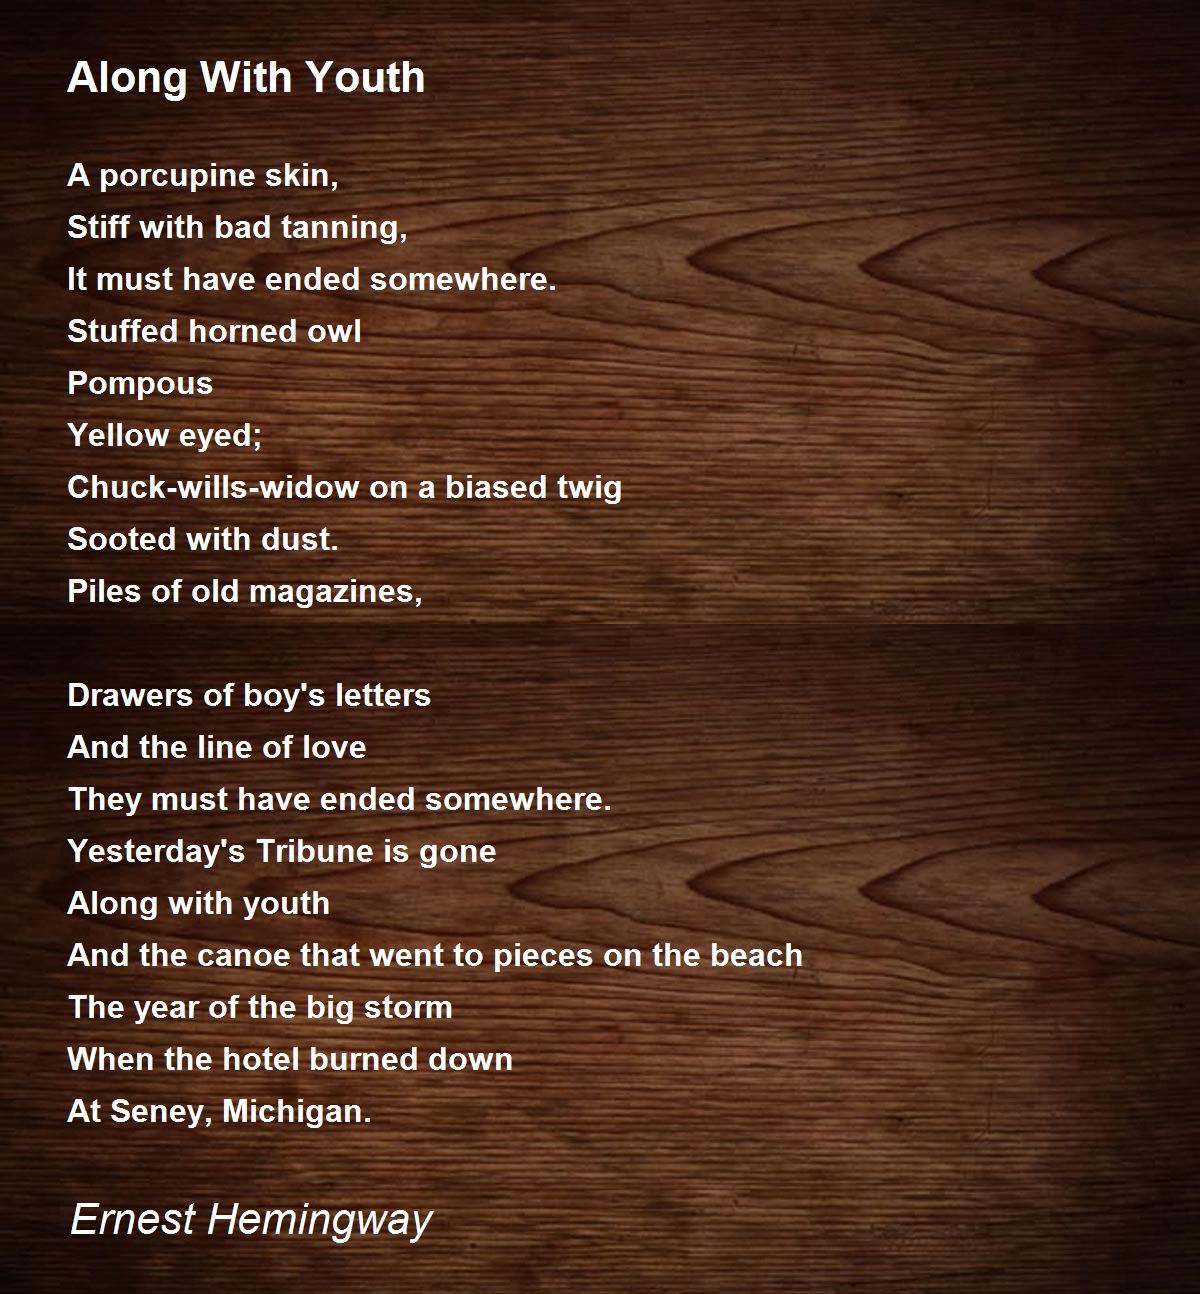 Along With Youth Poem by Ernest Hemingway - Poem Hunter